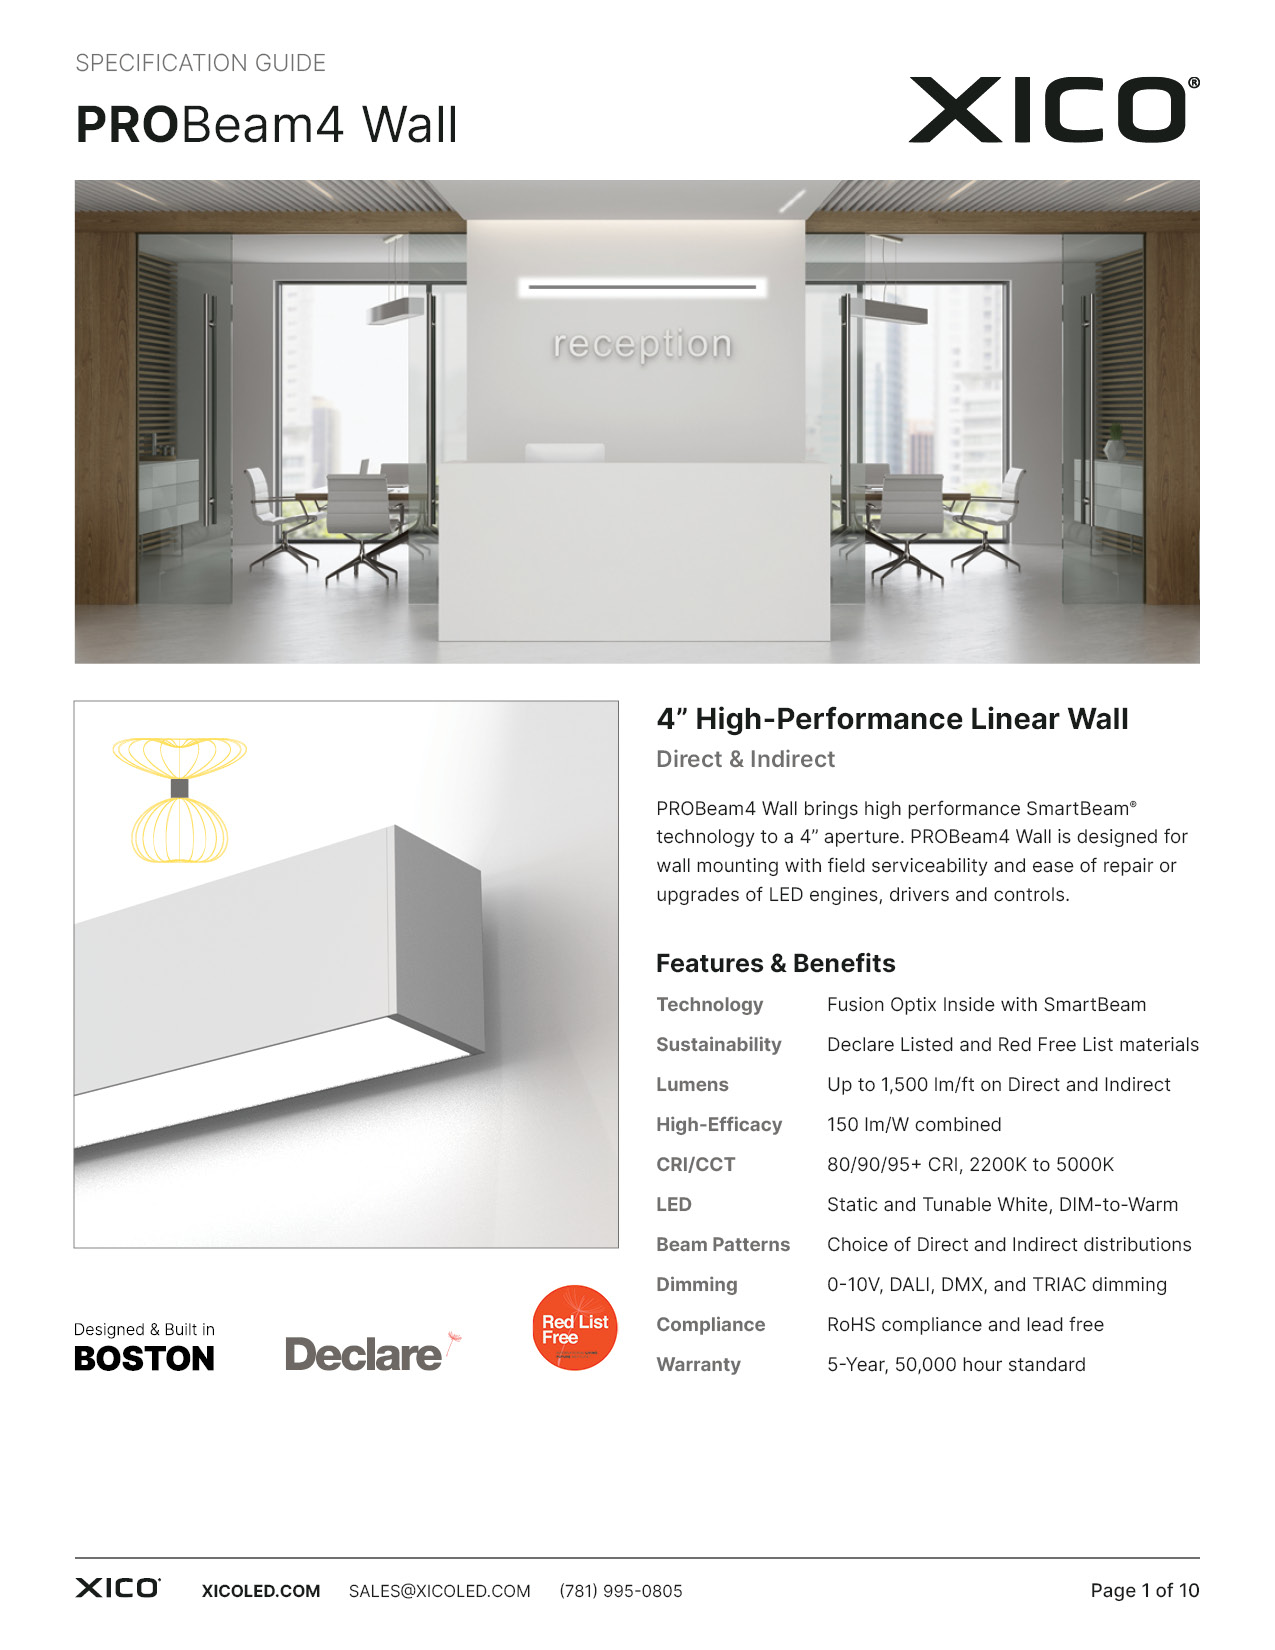 PROBeam4 Wall Specification Guide